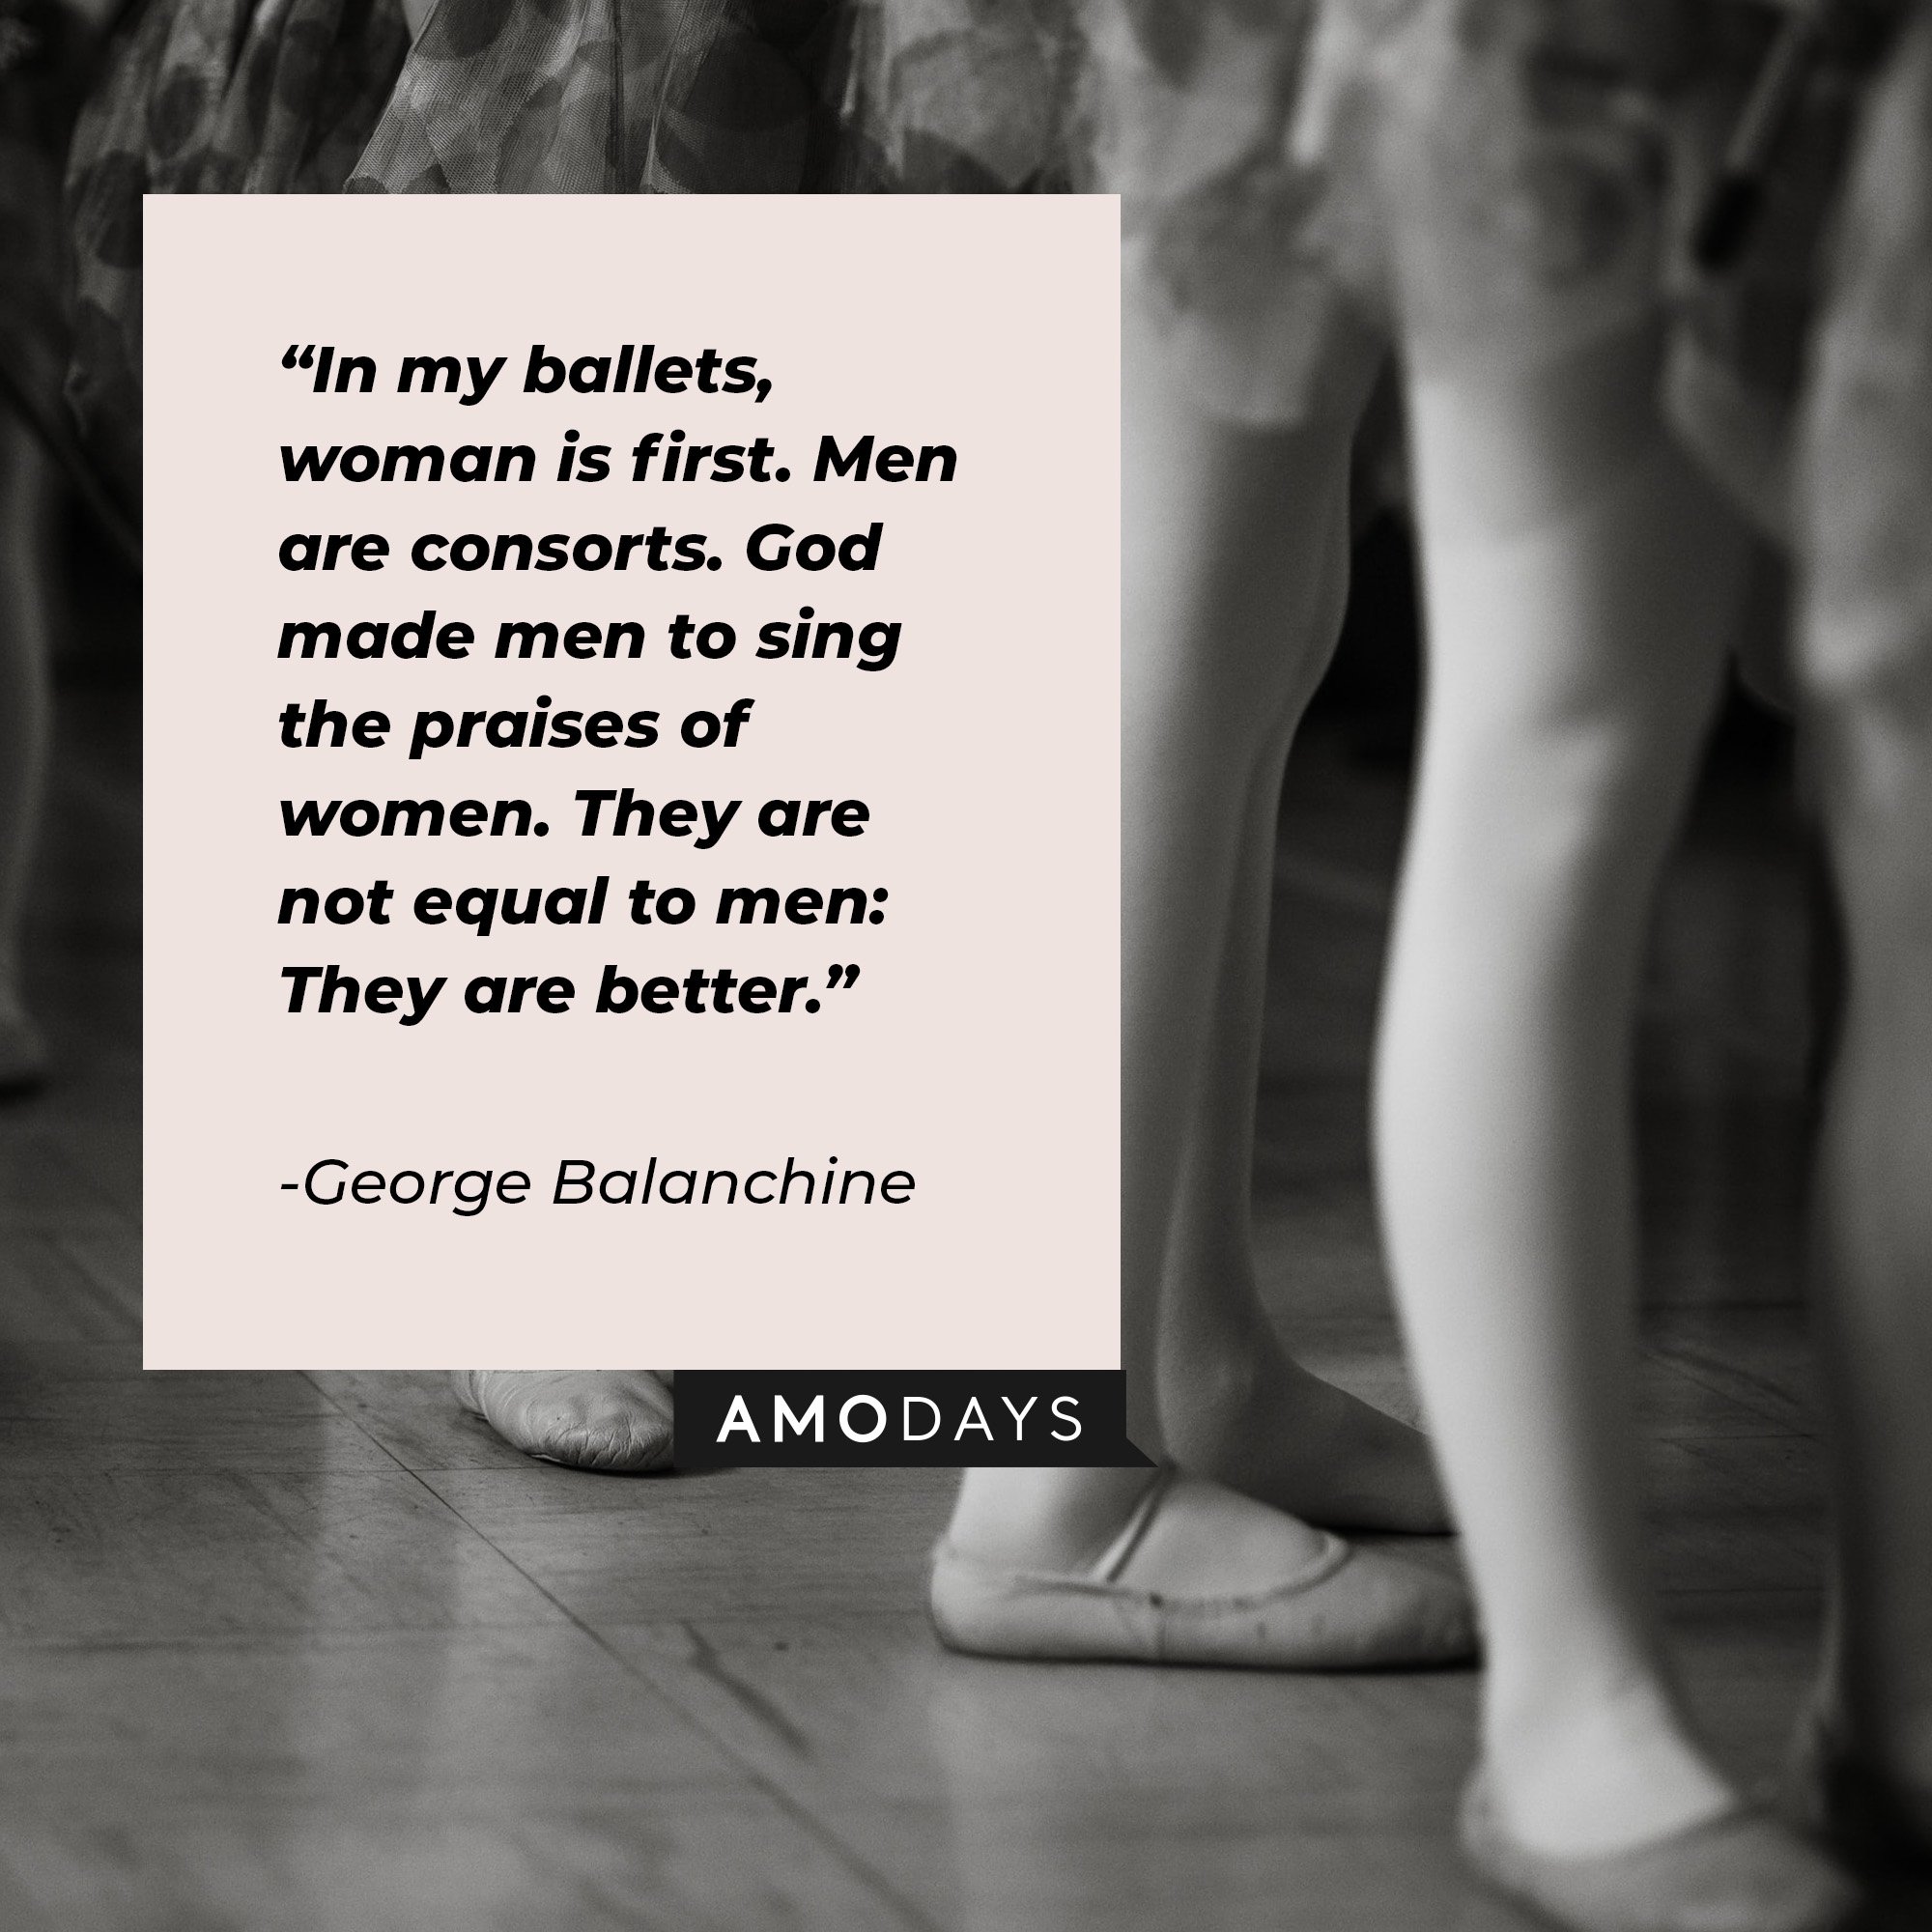 George Balanchine’s quote: “In my ballets, woman is first. Men are consorts. God made men to sing the praises of women. They are not equal to men: They are better.” | Image: AmoDays